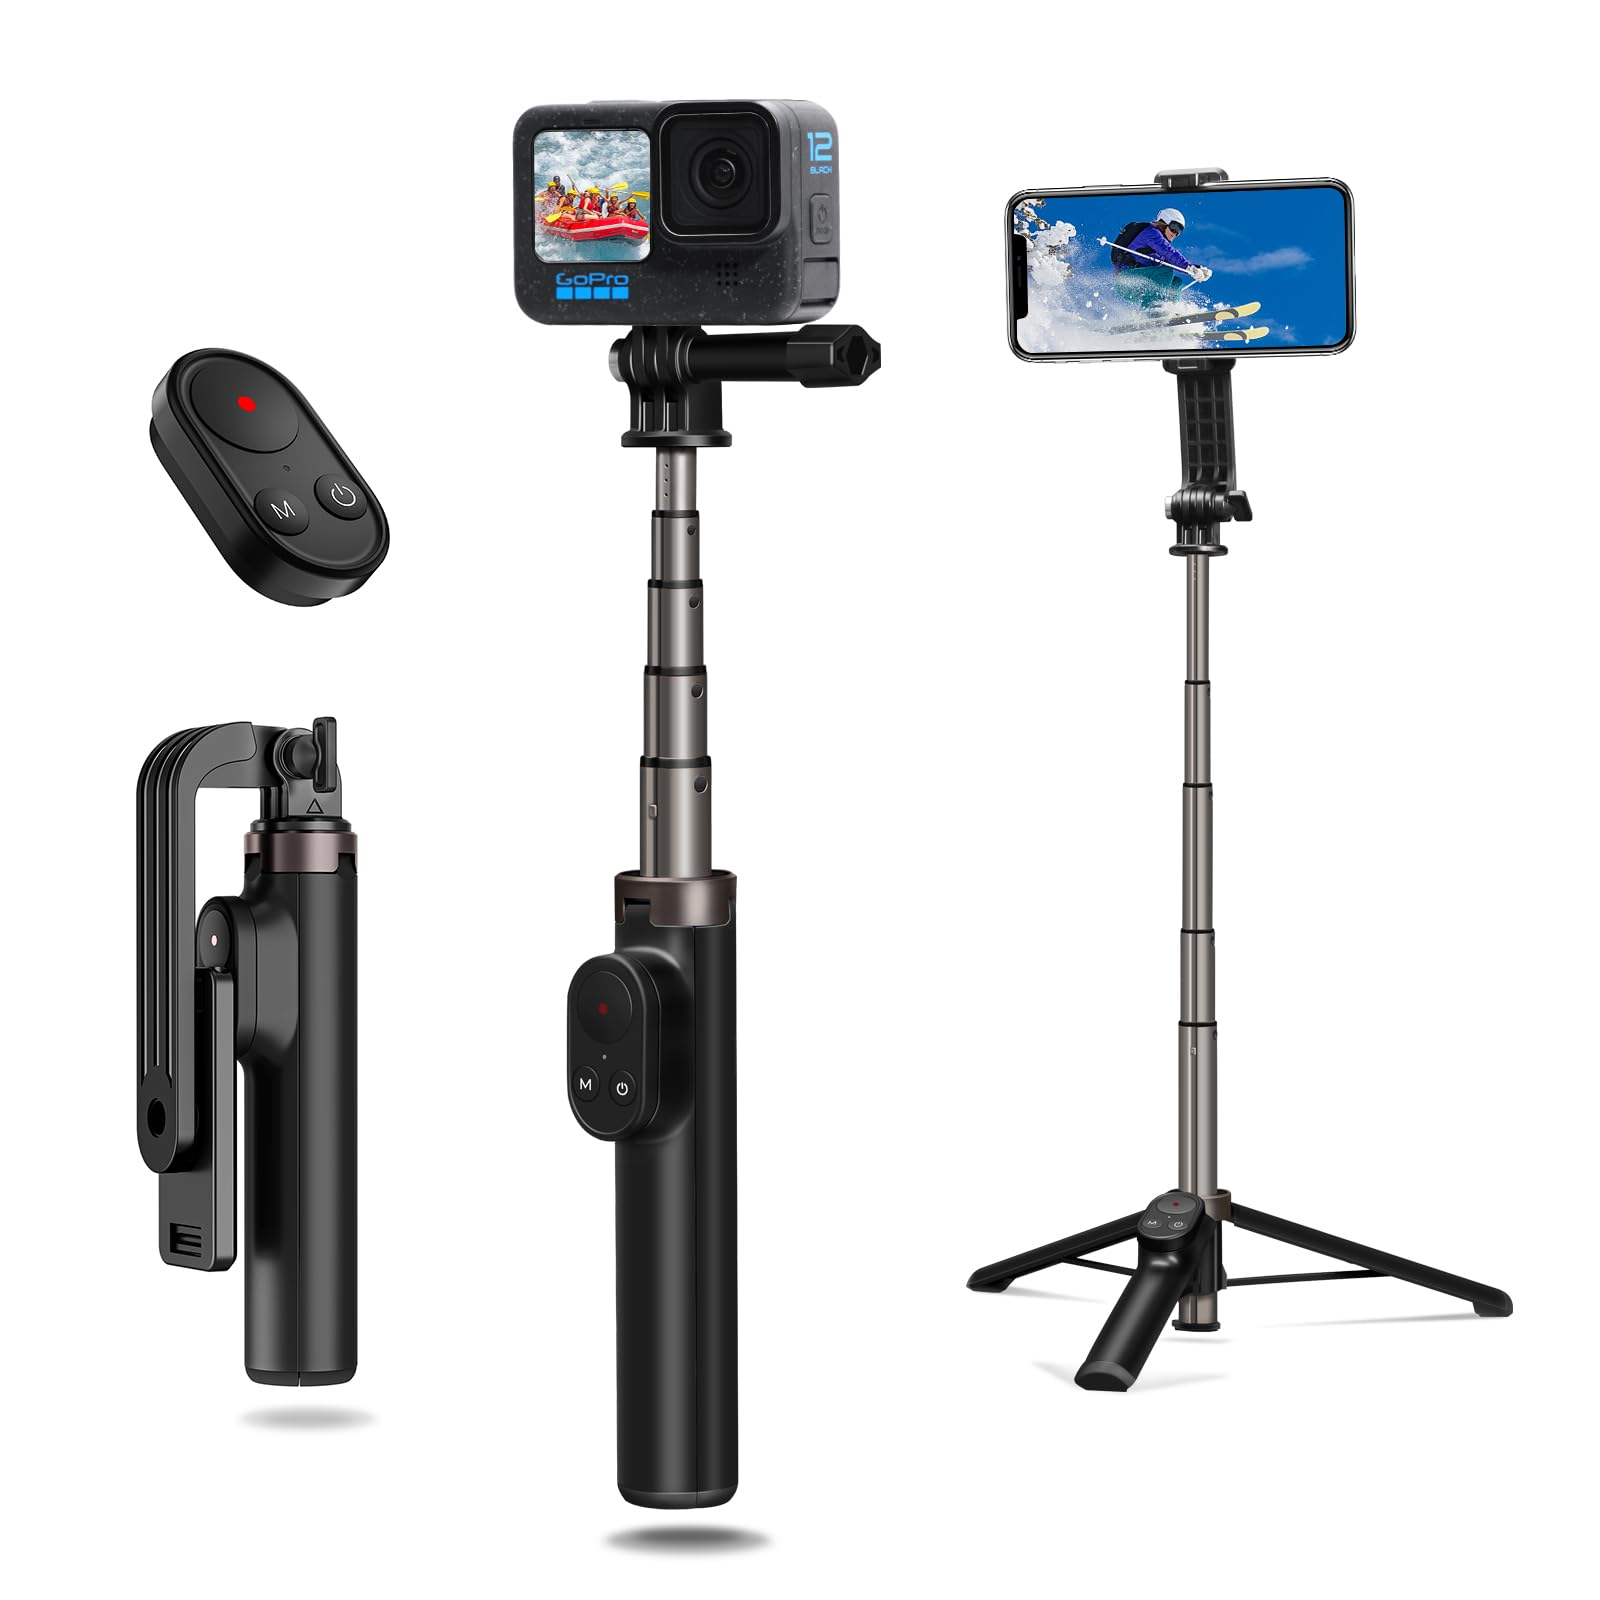 attaching-your-bluetooth-remote-to-the-xiaoyi-monopod-a-quick-clip-guide